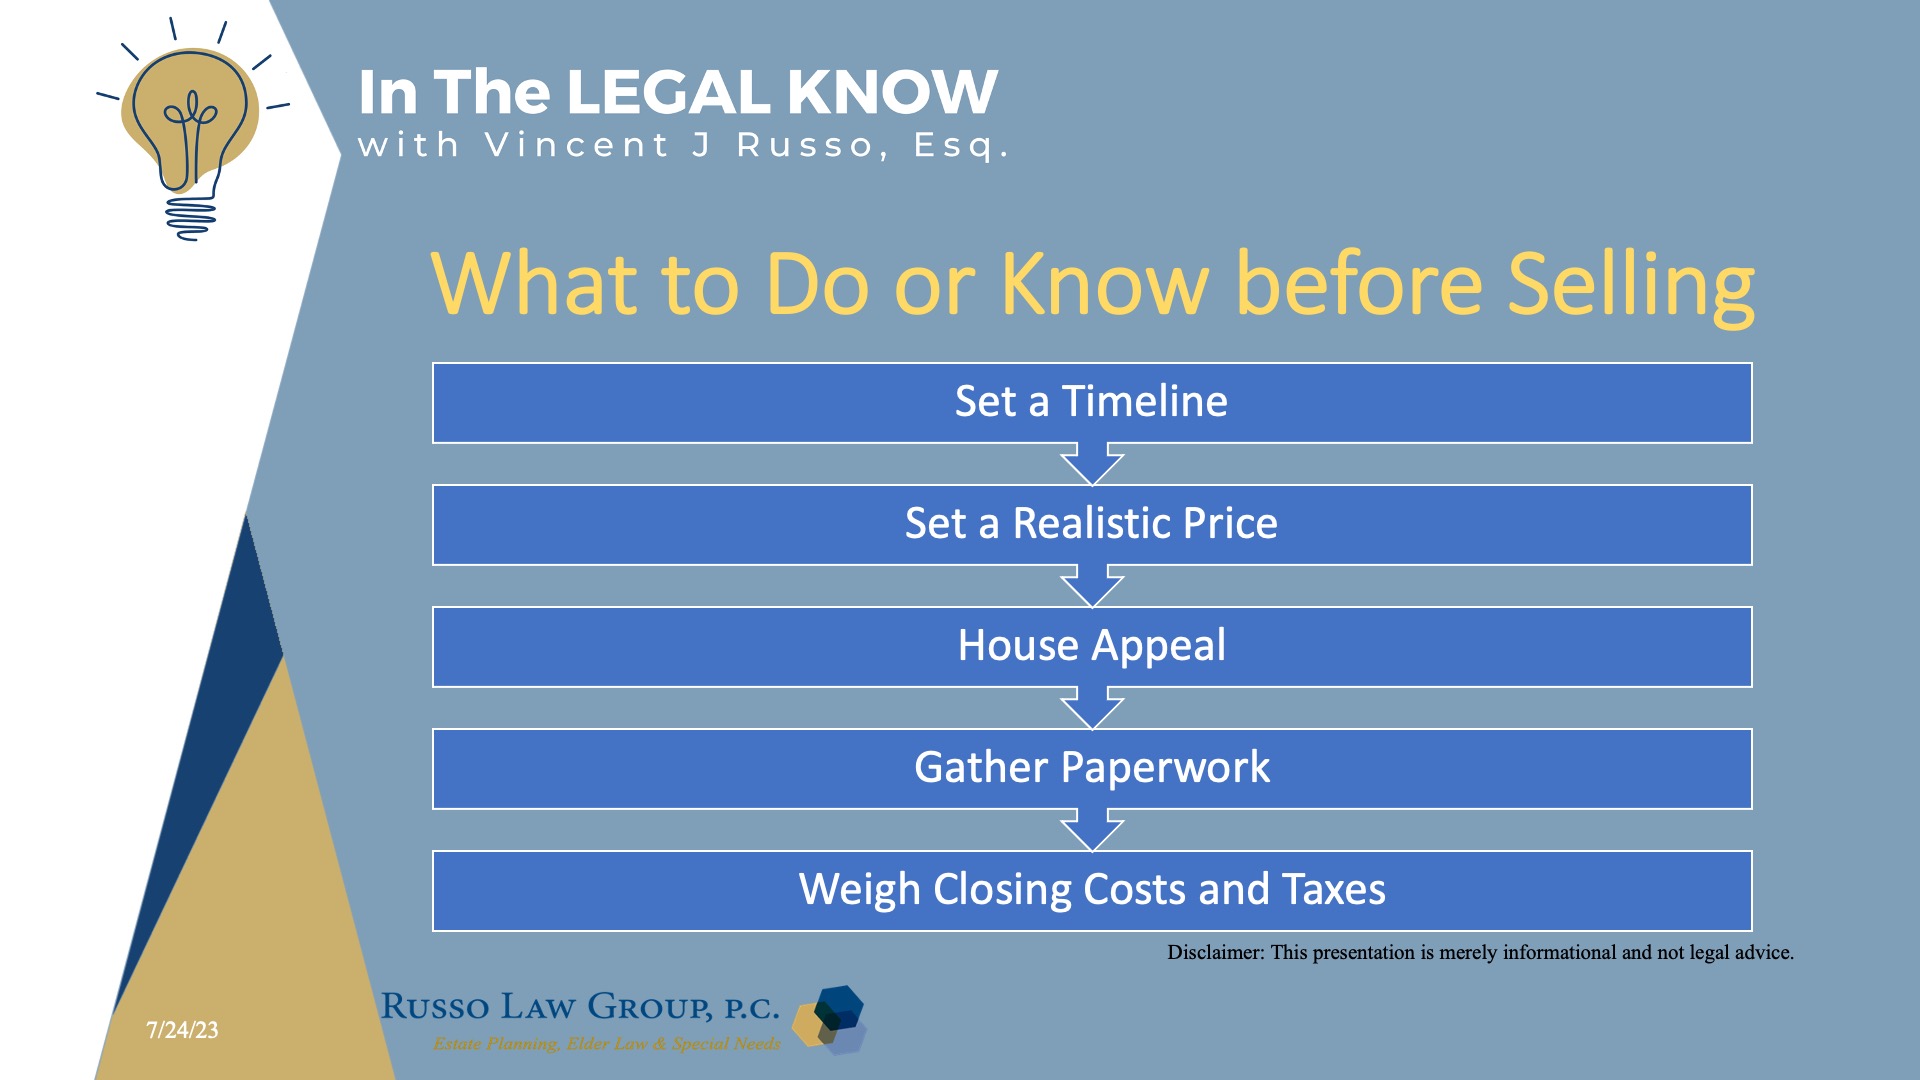 What to Do or Know Before Selling